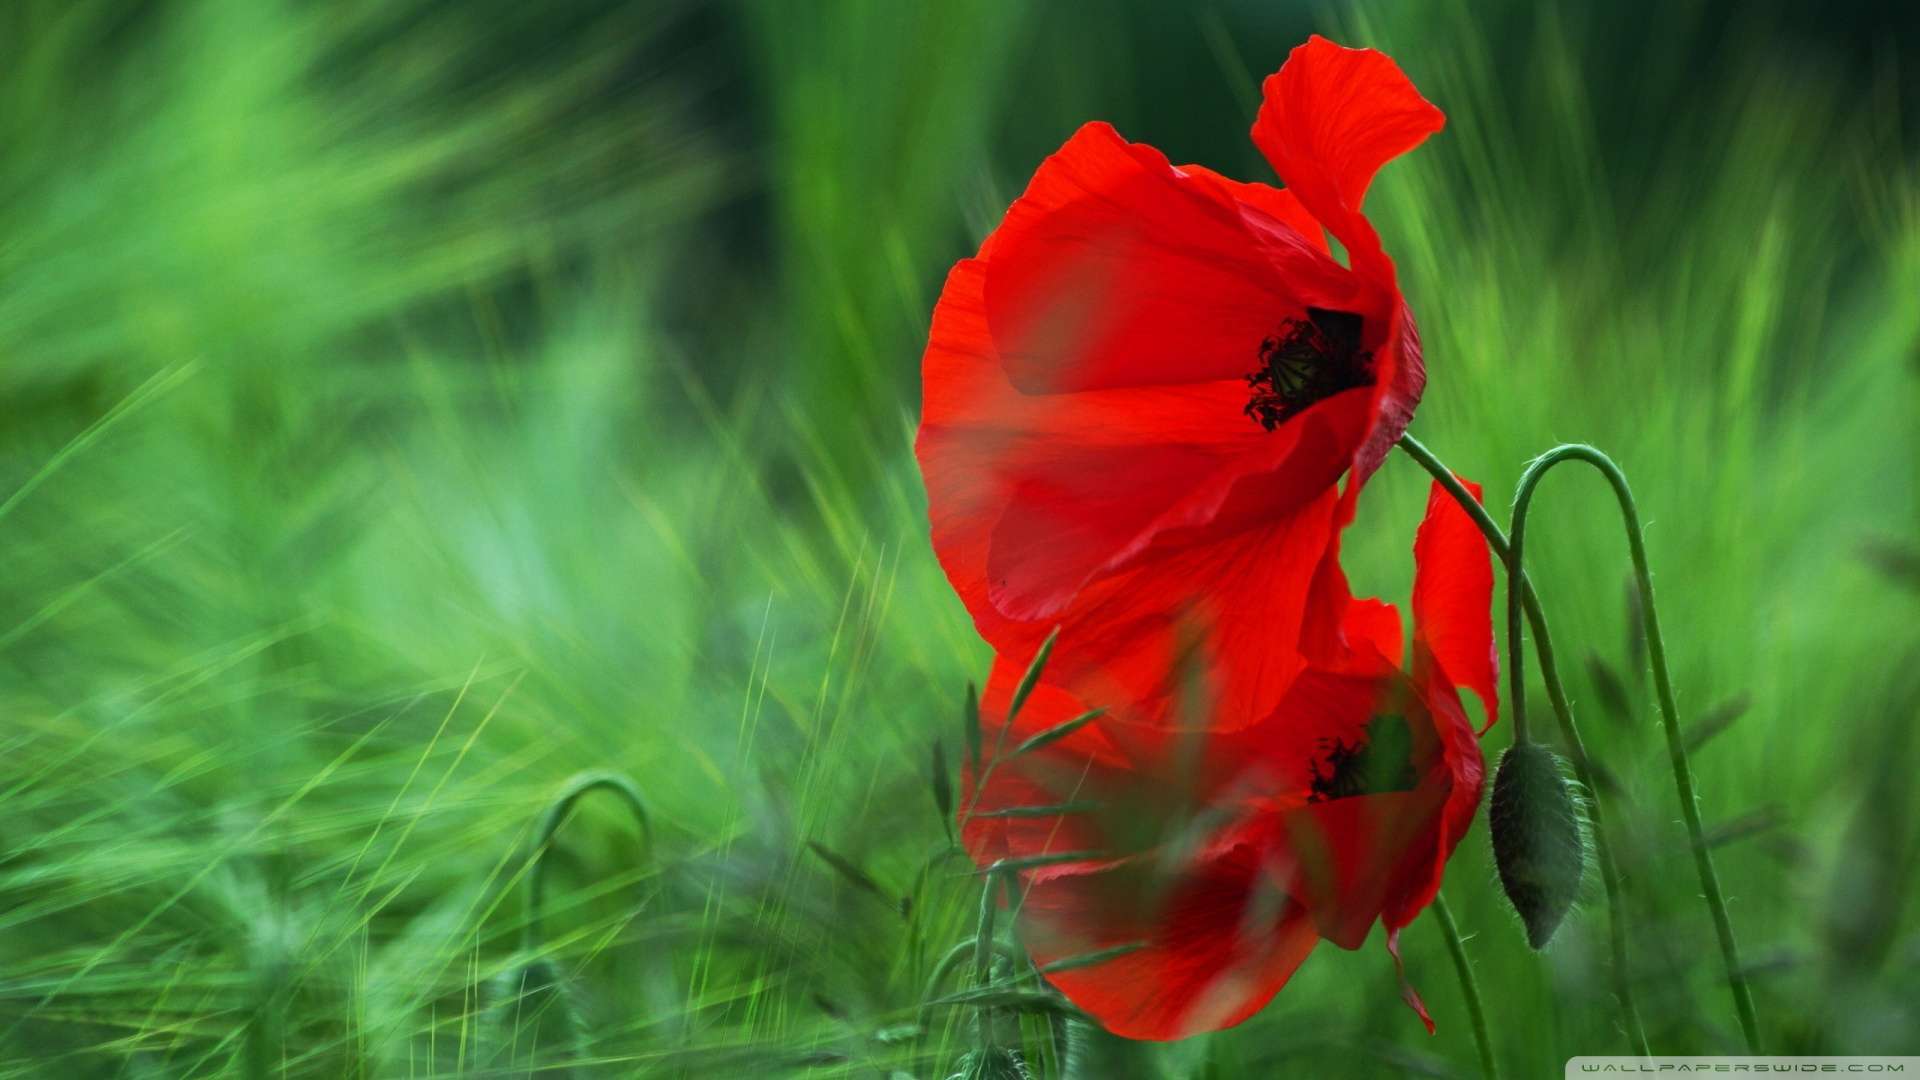 Red Poppy Wallpapers - Wallpaper Cave